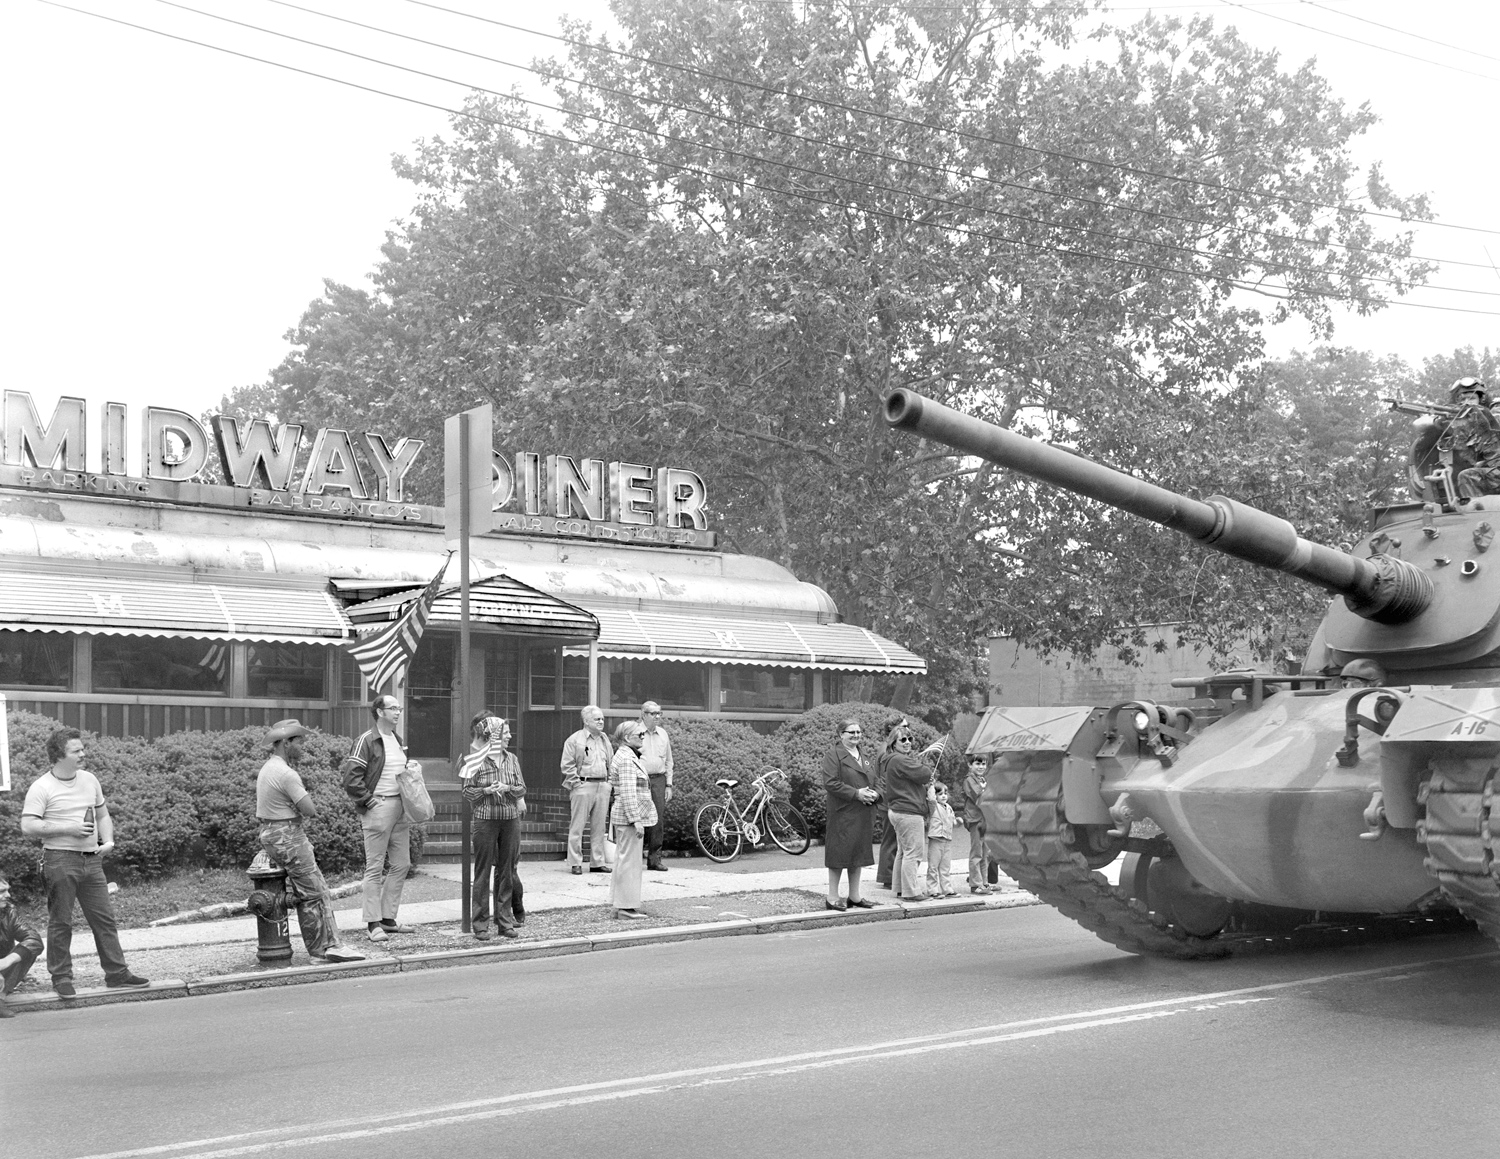 Midway Diner and tank during a parade.